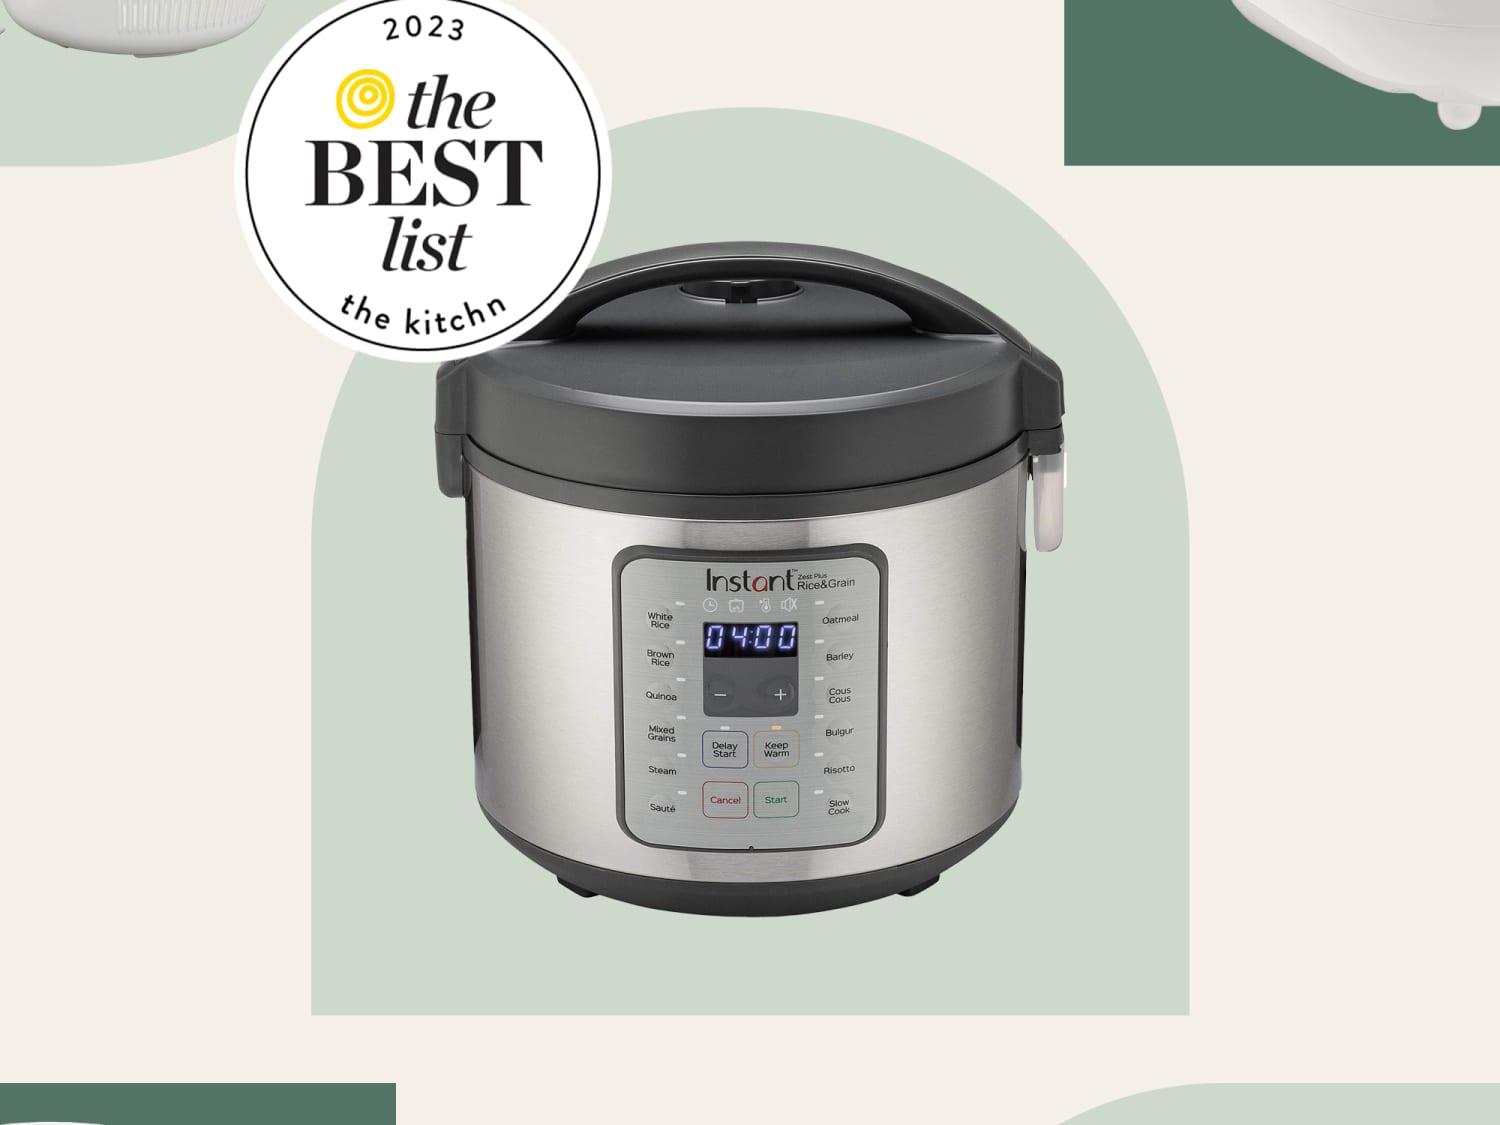 https://cdn.apartmenttherapy.info/image/upload/f_jpg,q_auto:eco,c_fill,g_auto,w_1500,ar_4:3/k%2Fbest-list-rice-cookers-2023-lead